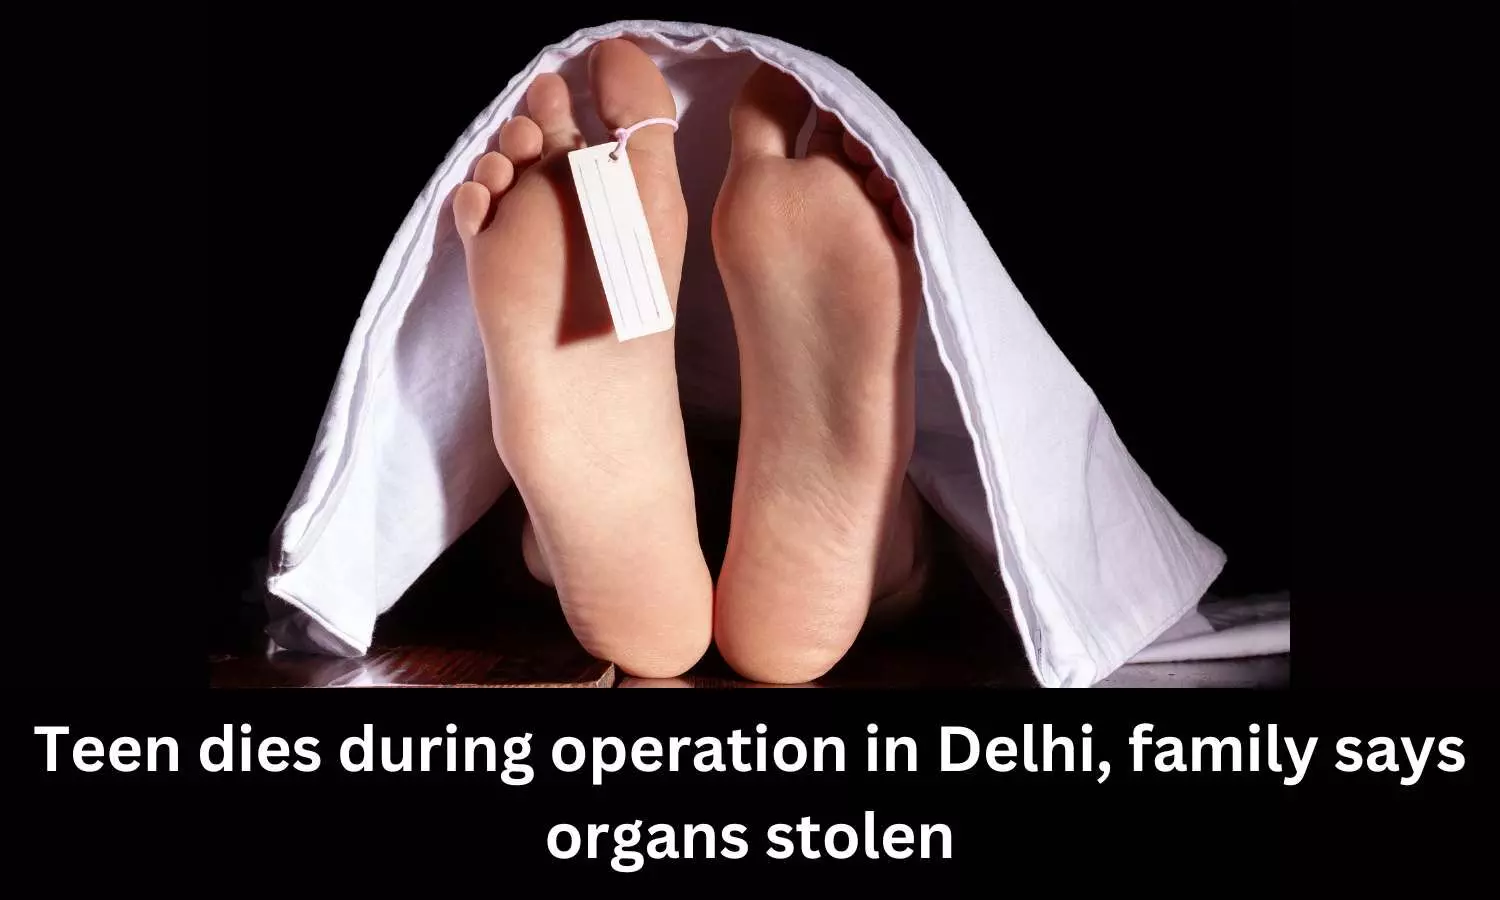 15-year-old girl dies after surgery in Delhi, family says organs stolen